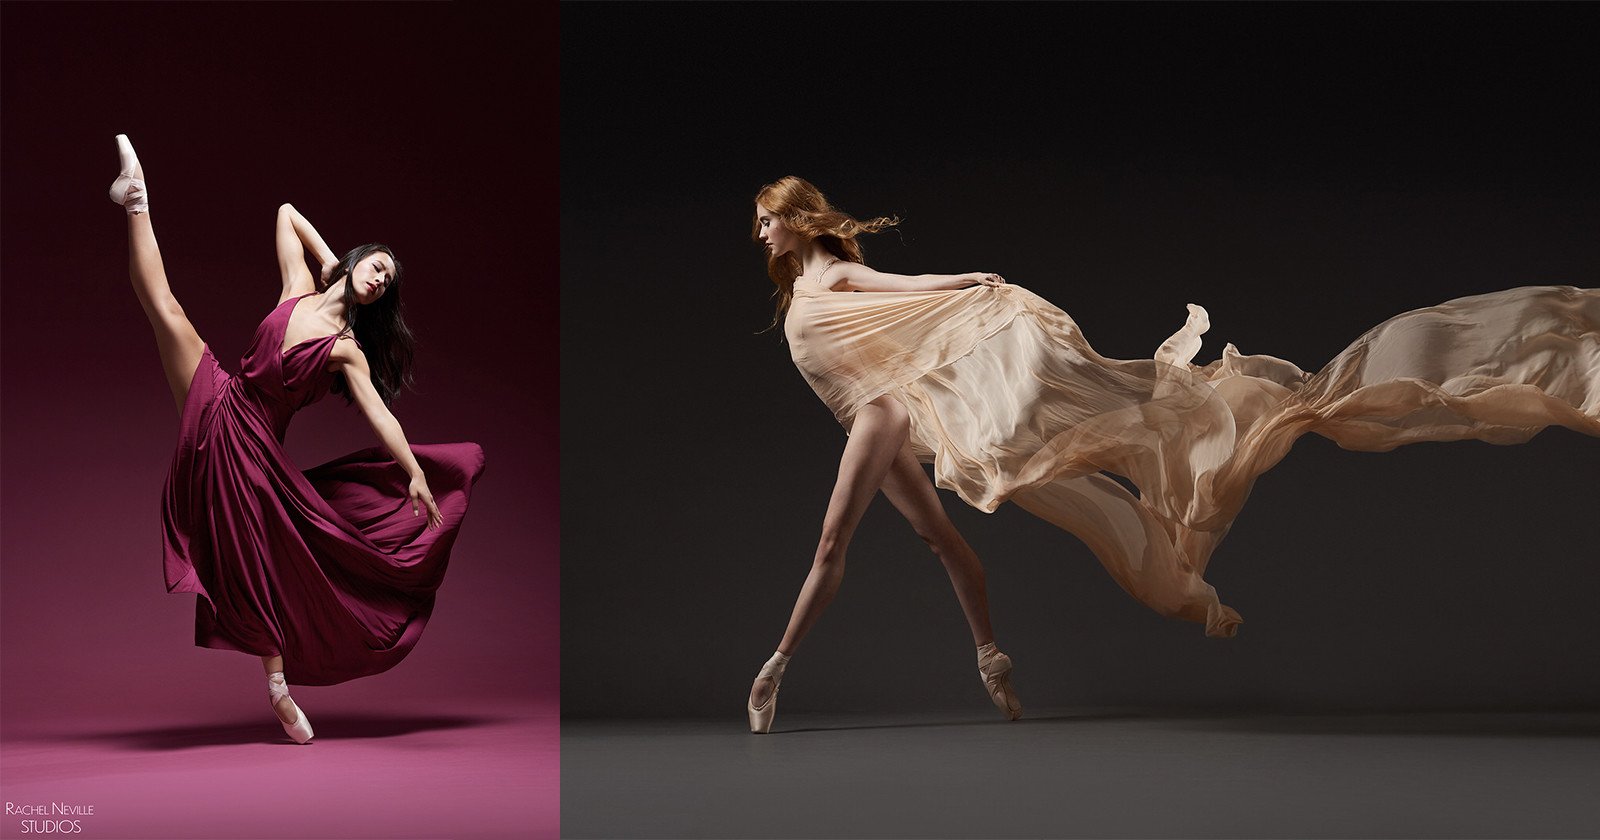 Pro Dancer Goes From Career-Ending Injury to Master Photographer